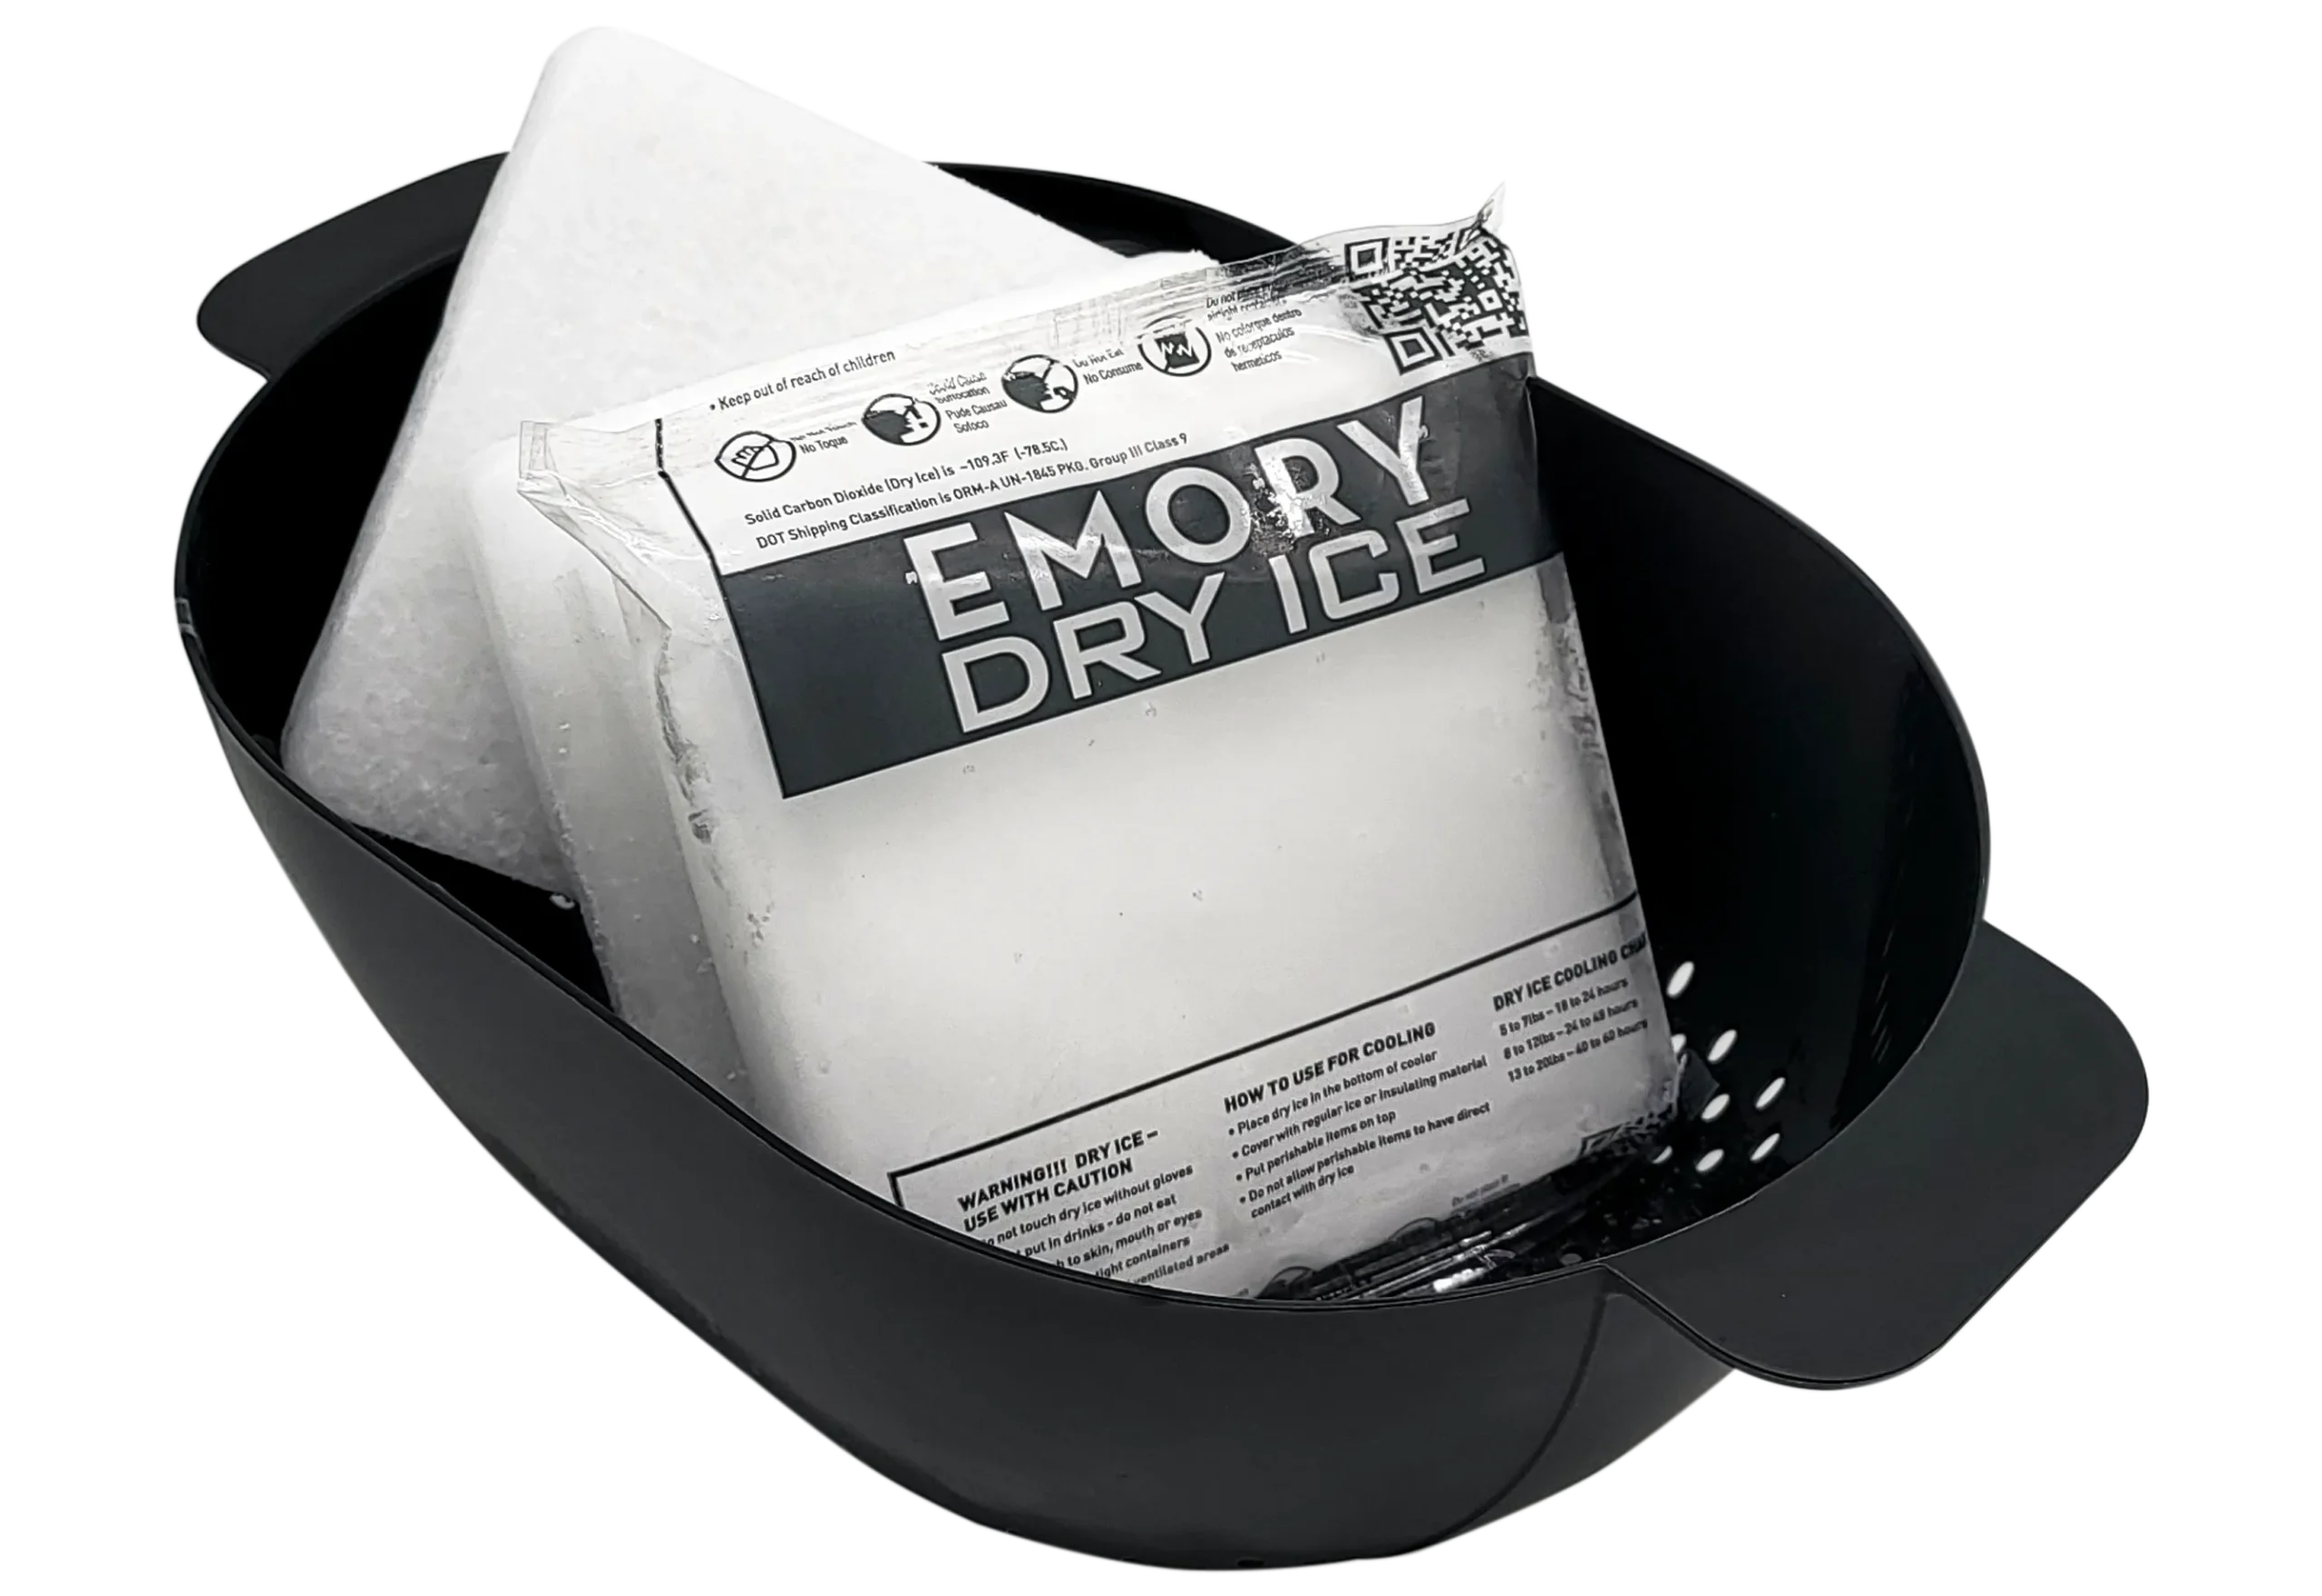 Emory Airline Cut Dry Ice Packaging